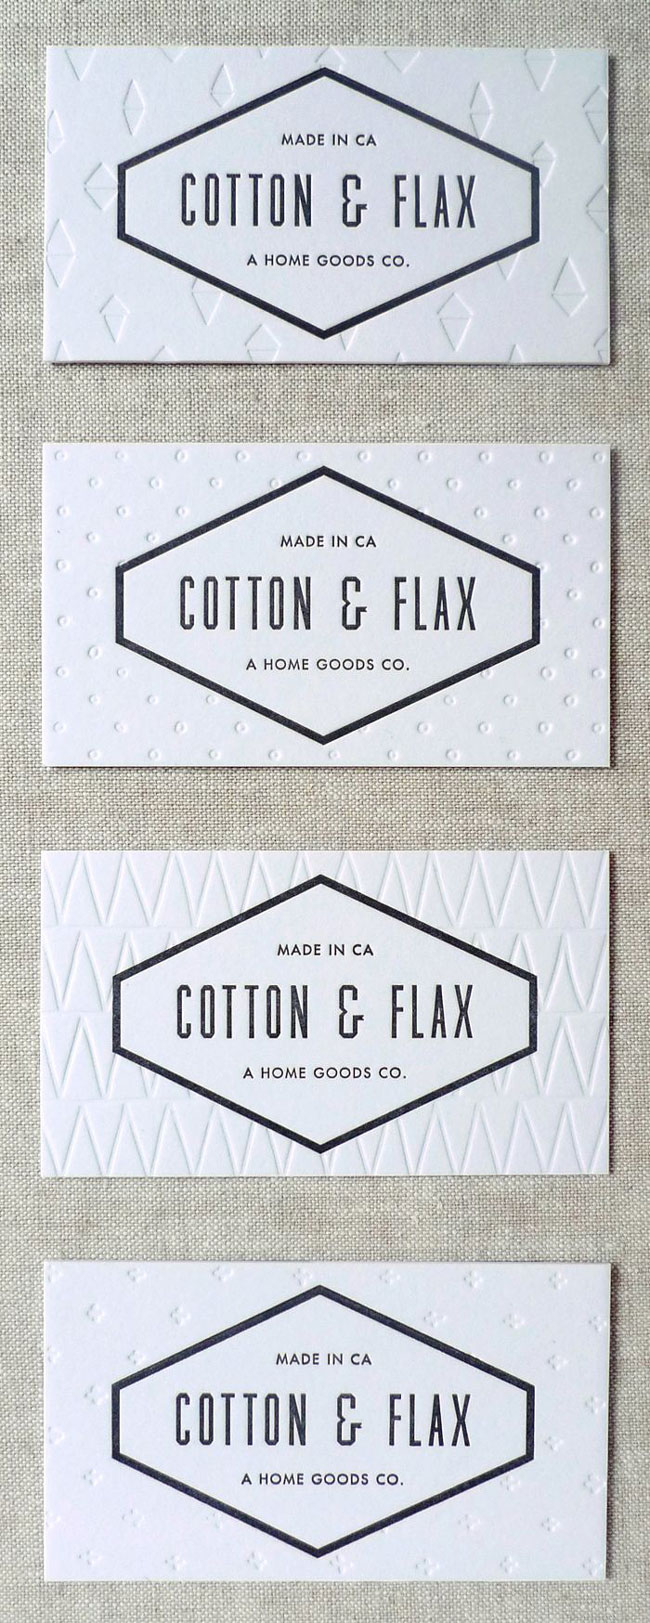 Letterpress printing example Cotton & Flax